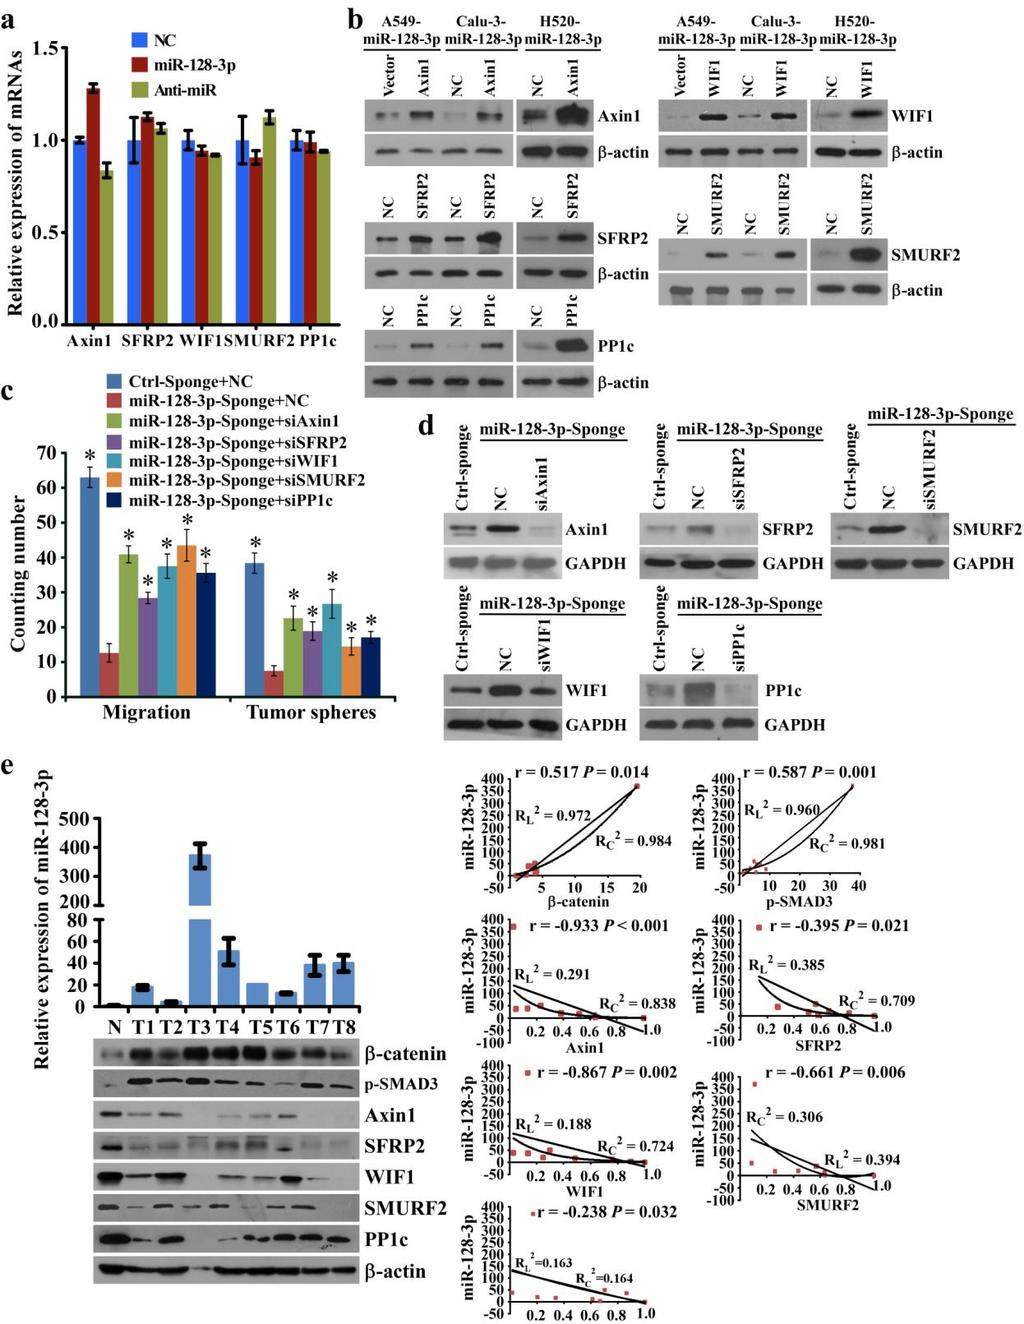 Supplementary Figure 9 mir-128-3p potently targets Axin1, SFRP2, WIF1, SMURFS or PP1c to activate the Wnt/β-catenin and TGF-β signaling in NSCLC cells.